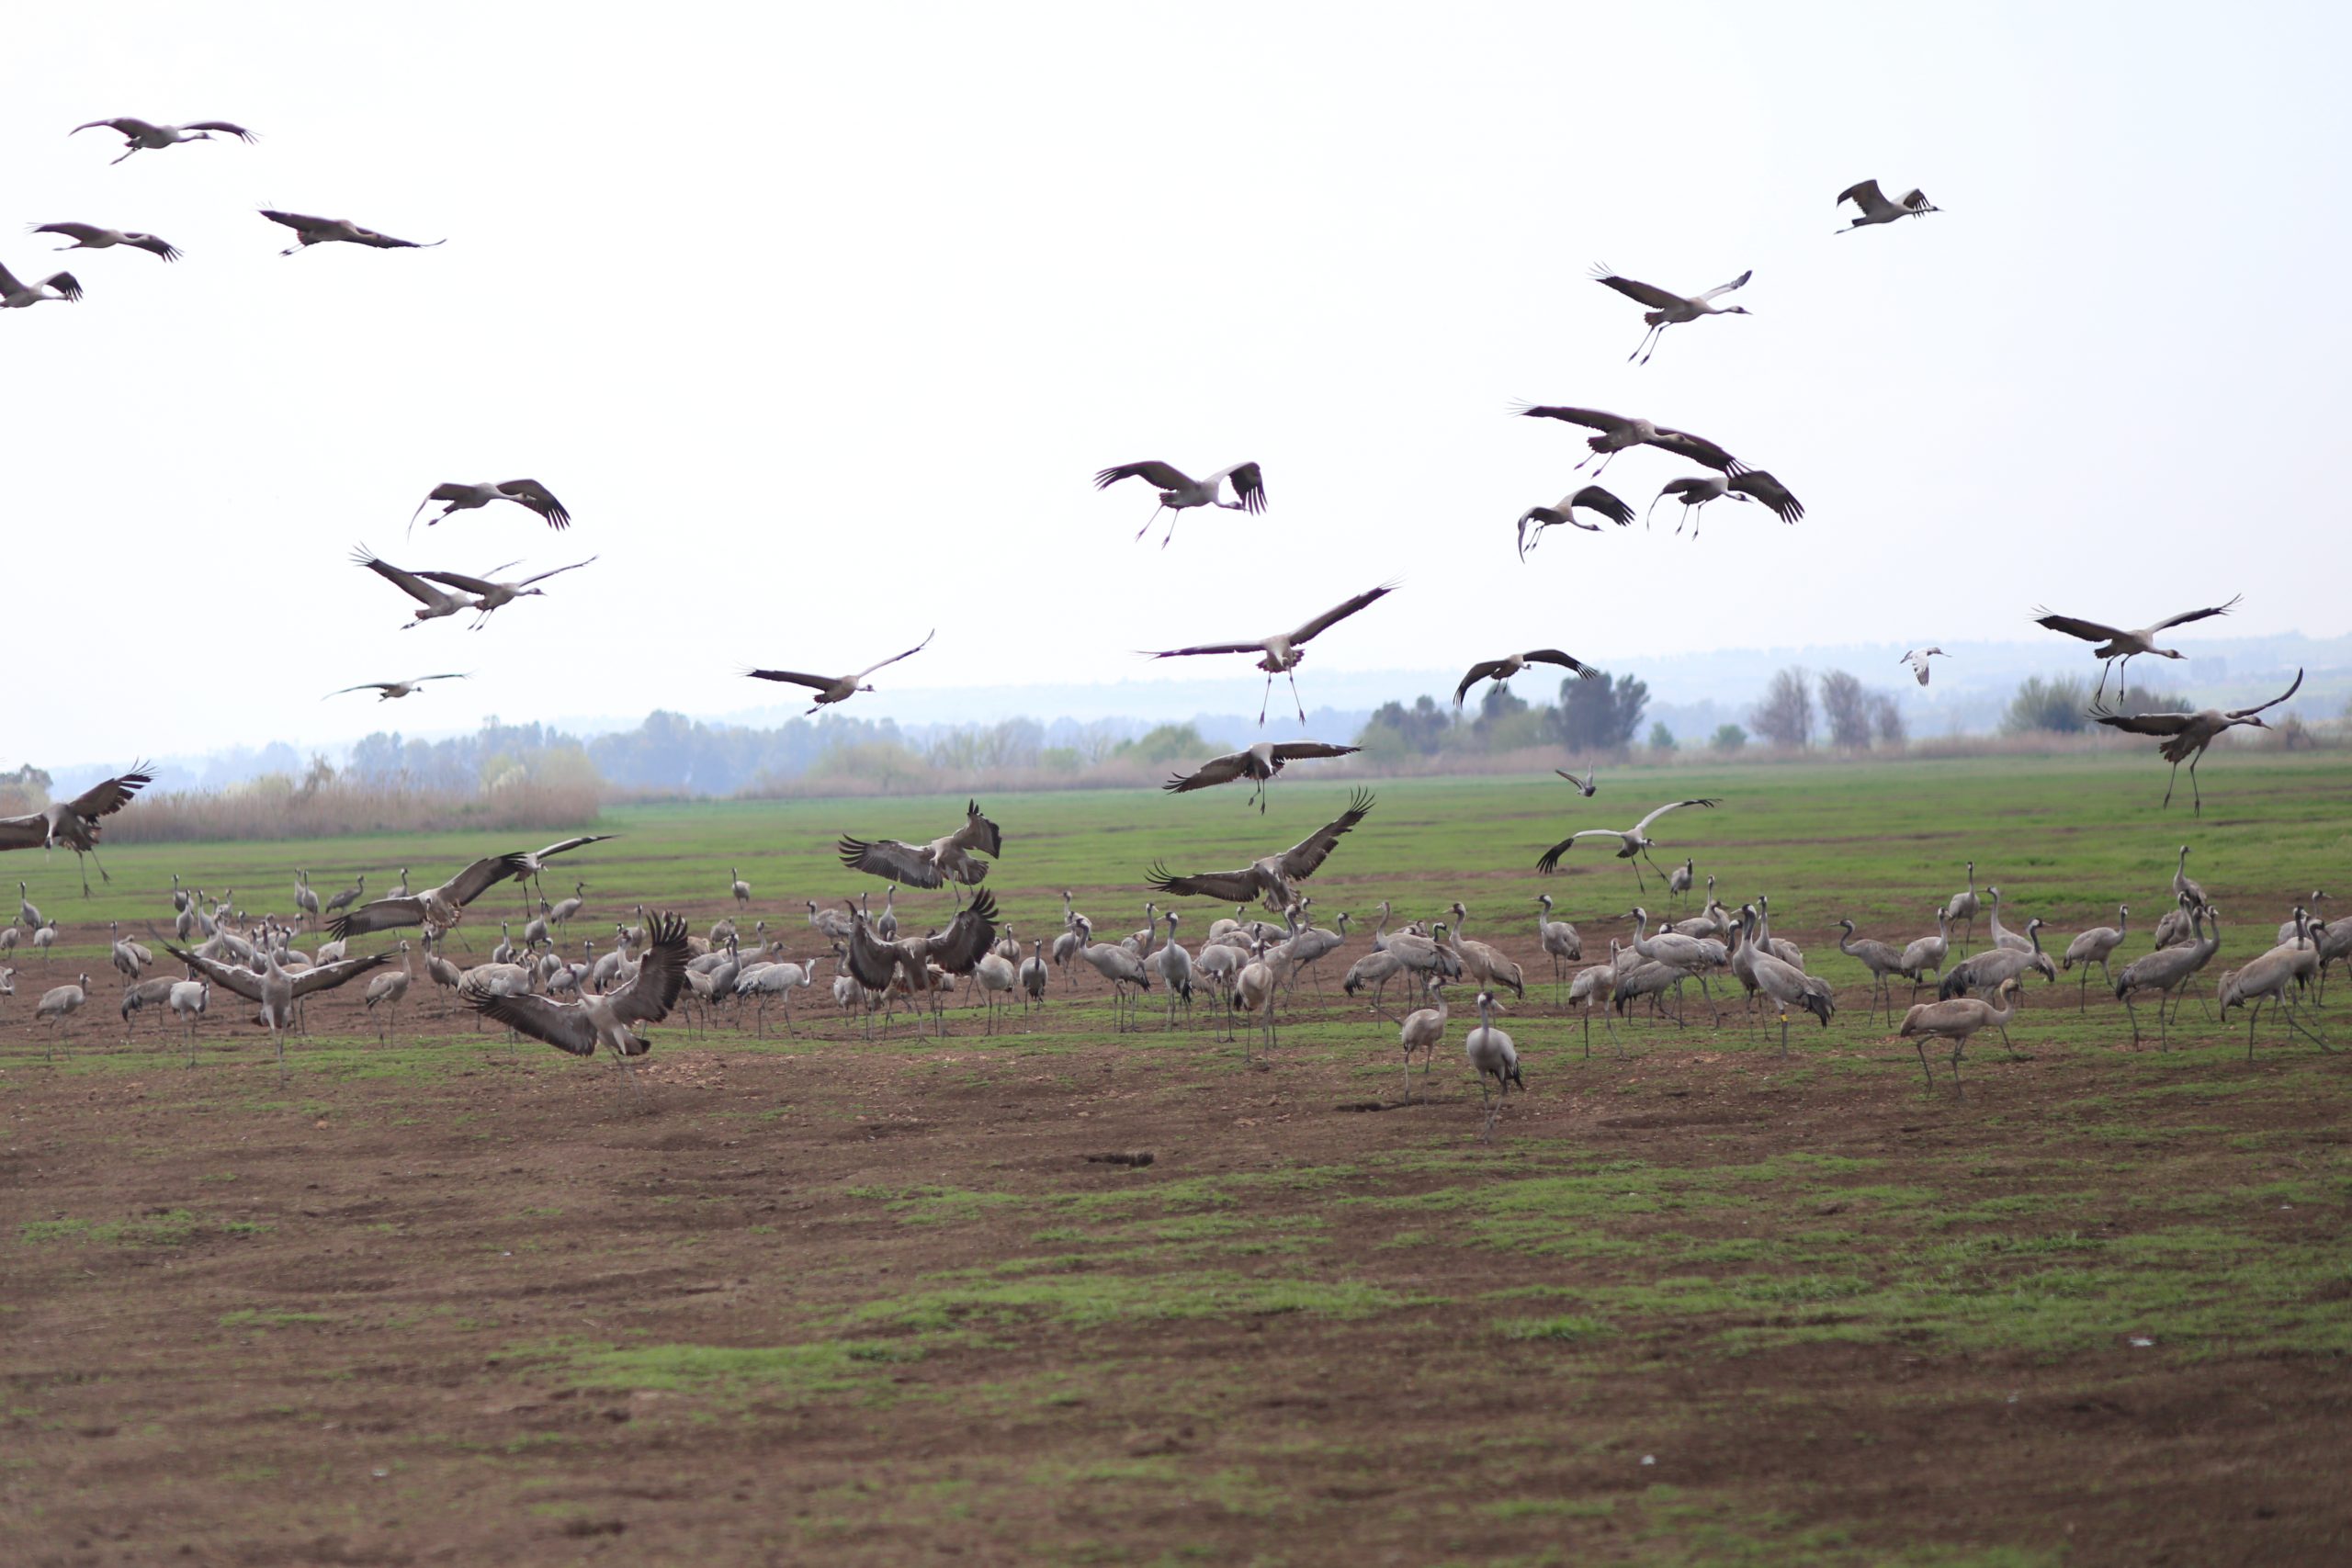 A severe outbreak of avian flu in Israel deaths of about 5,000 migratory cranes